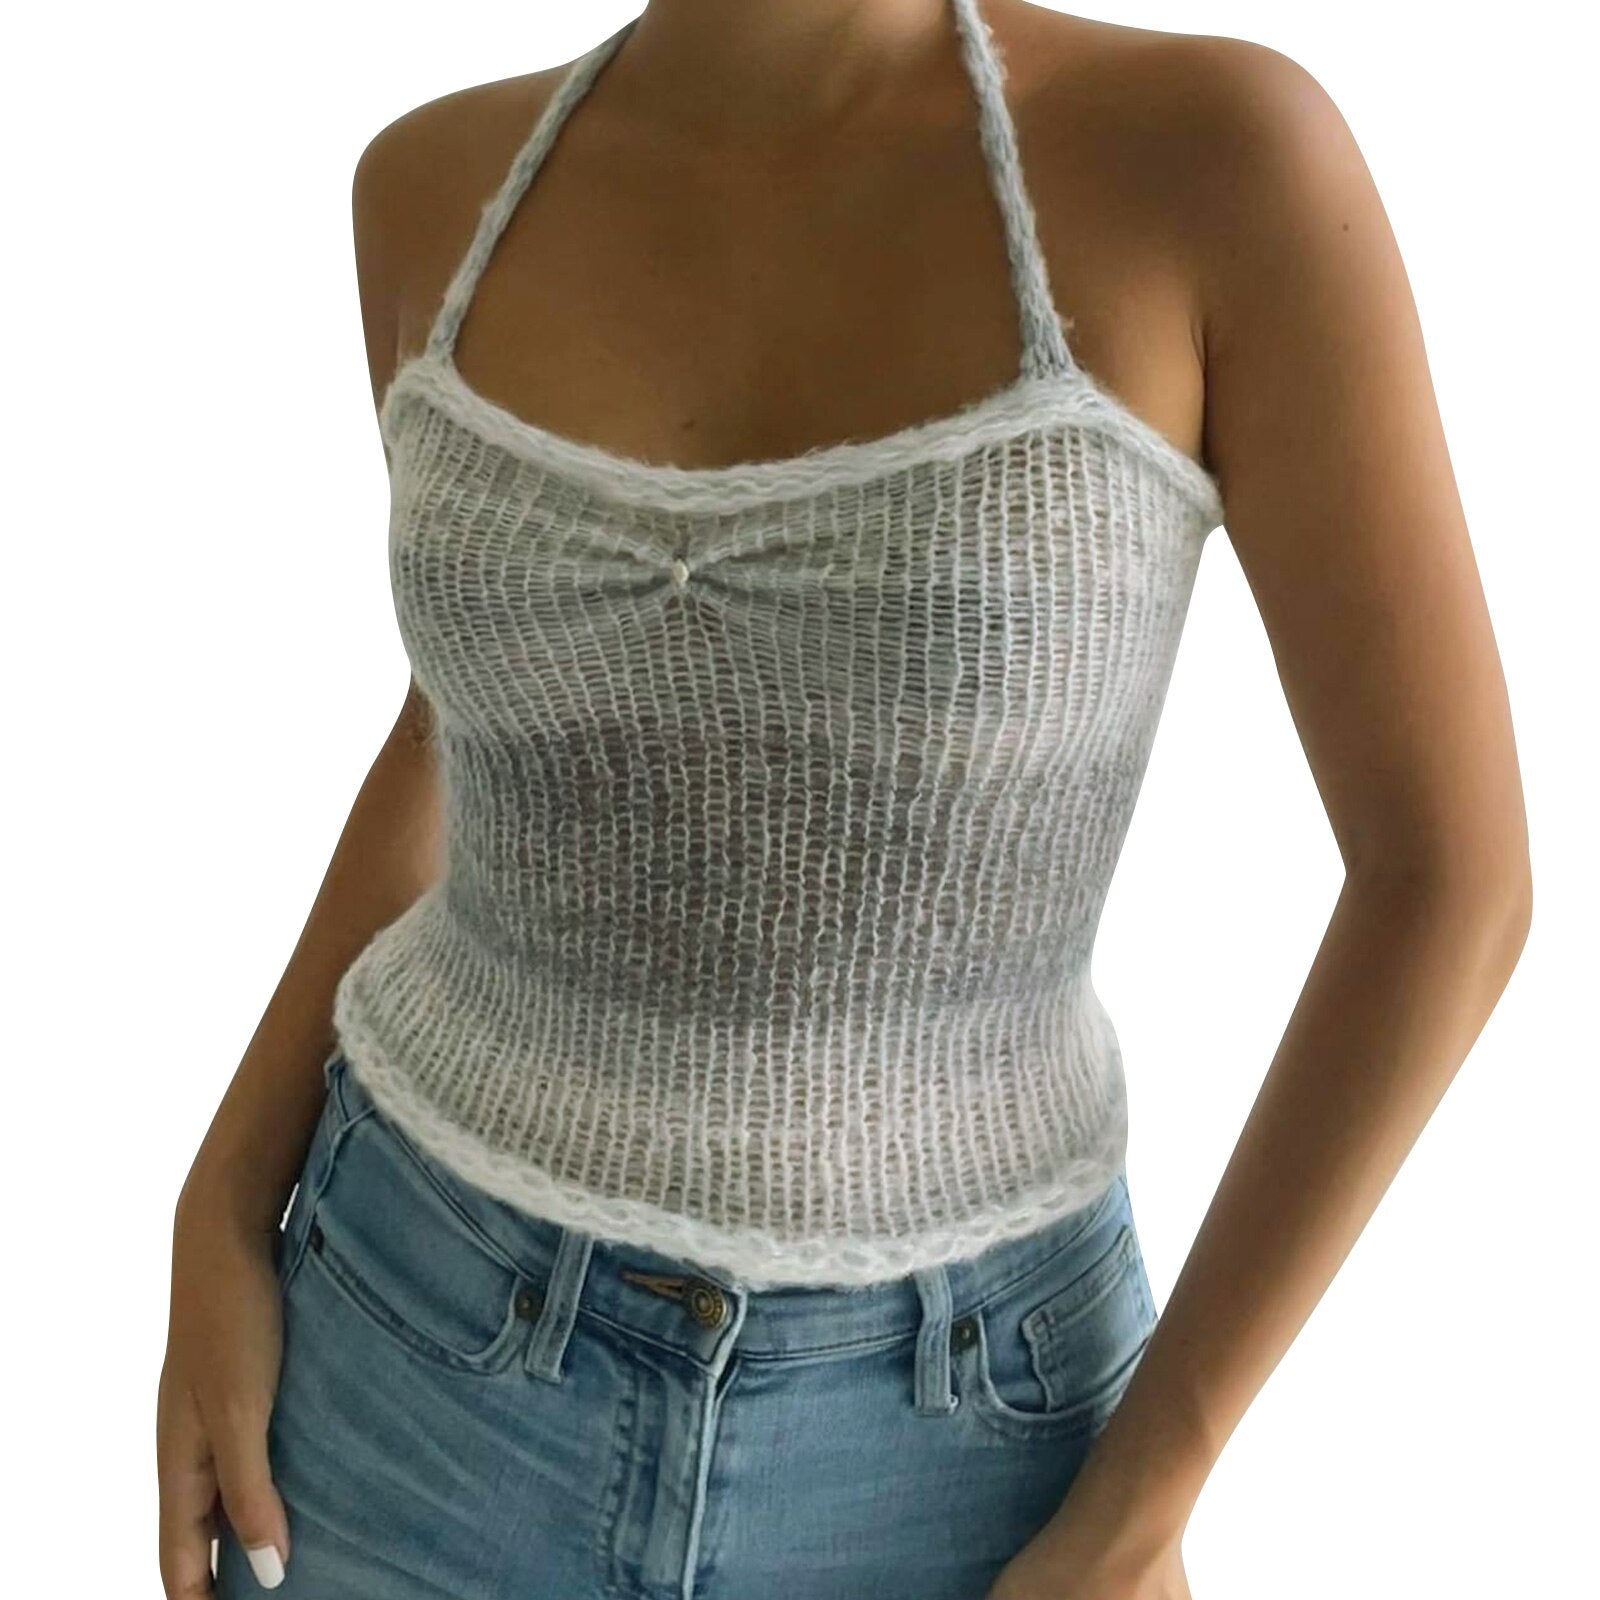 Moon Crescent Dreams Vintage Retro Knitted Halter Top - Y2k Aesthetic, Backless Spaghetti Strap Boho Camisole - Women Sleeveless Crochet Crop Top